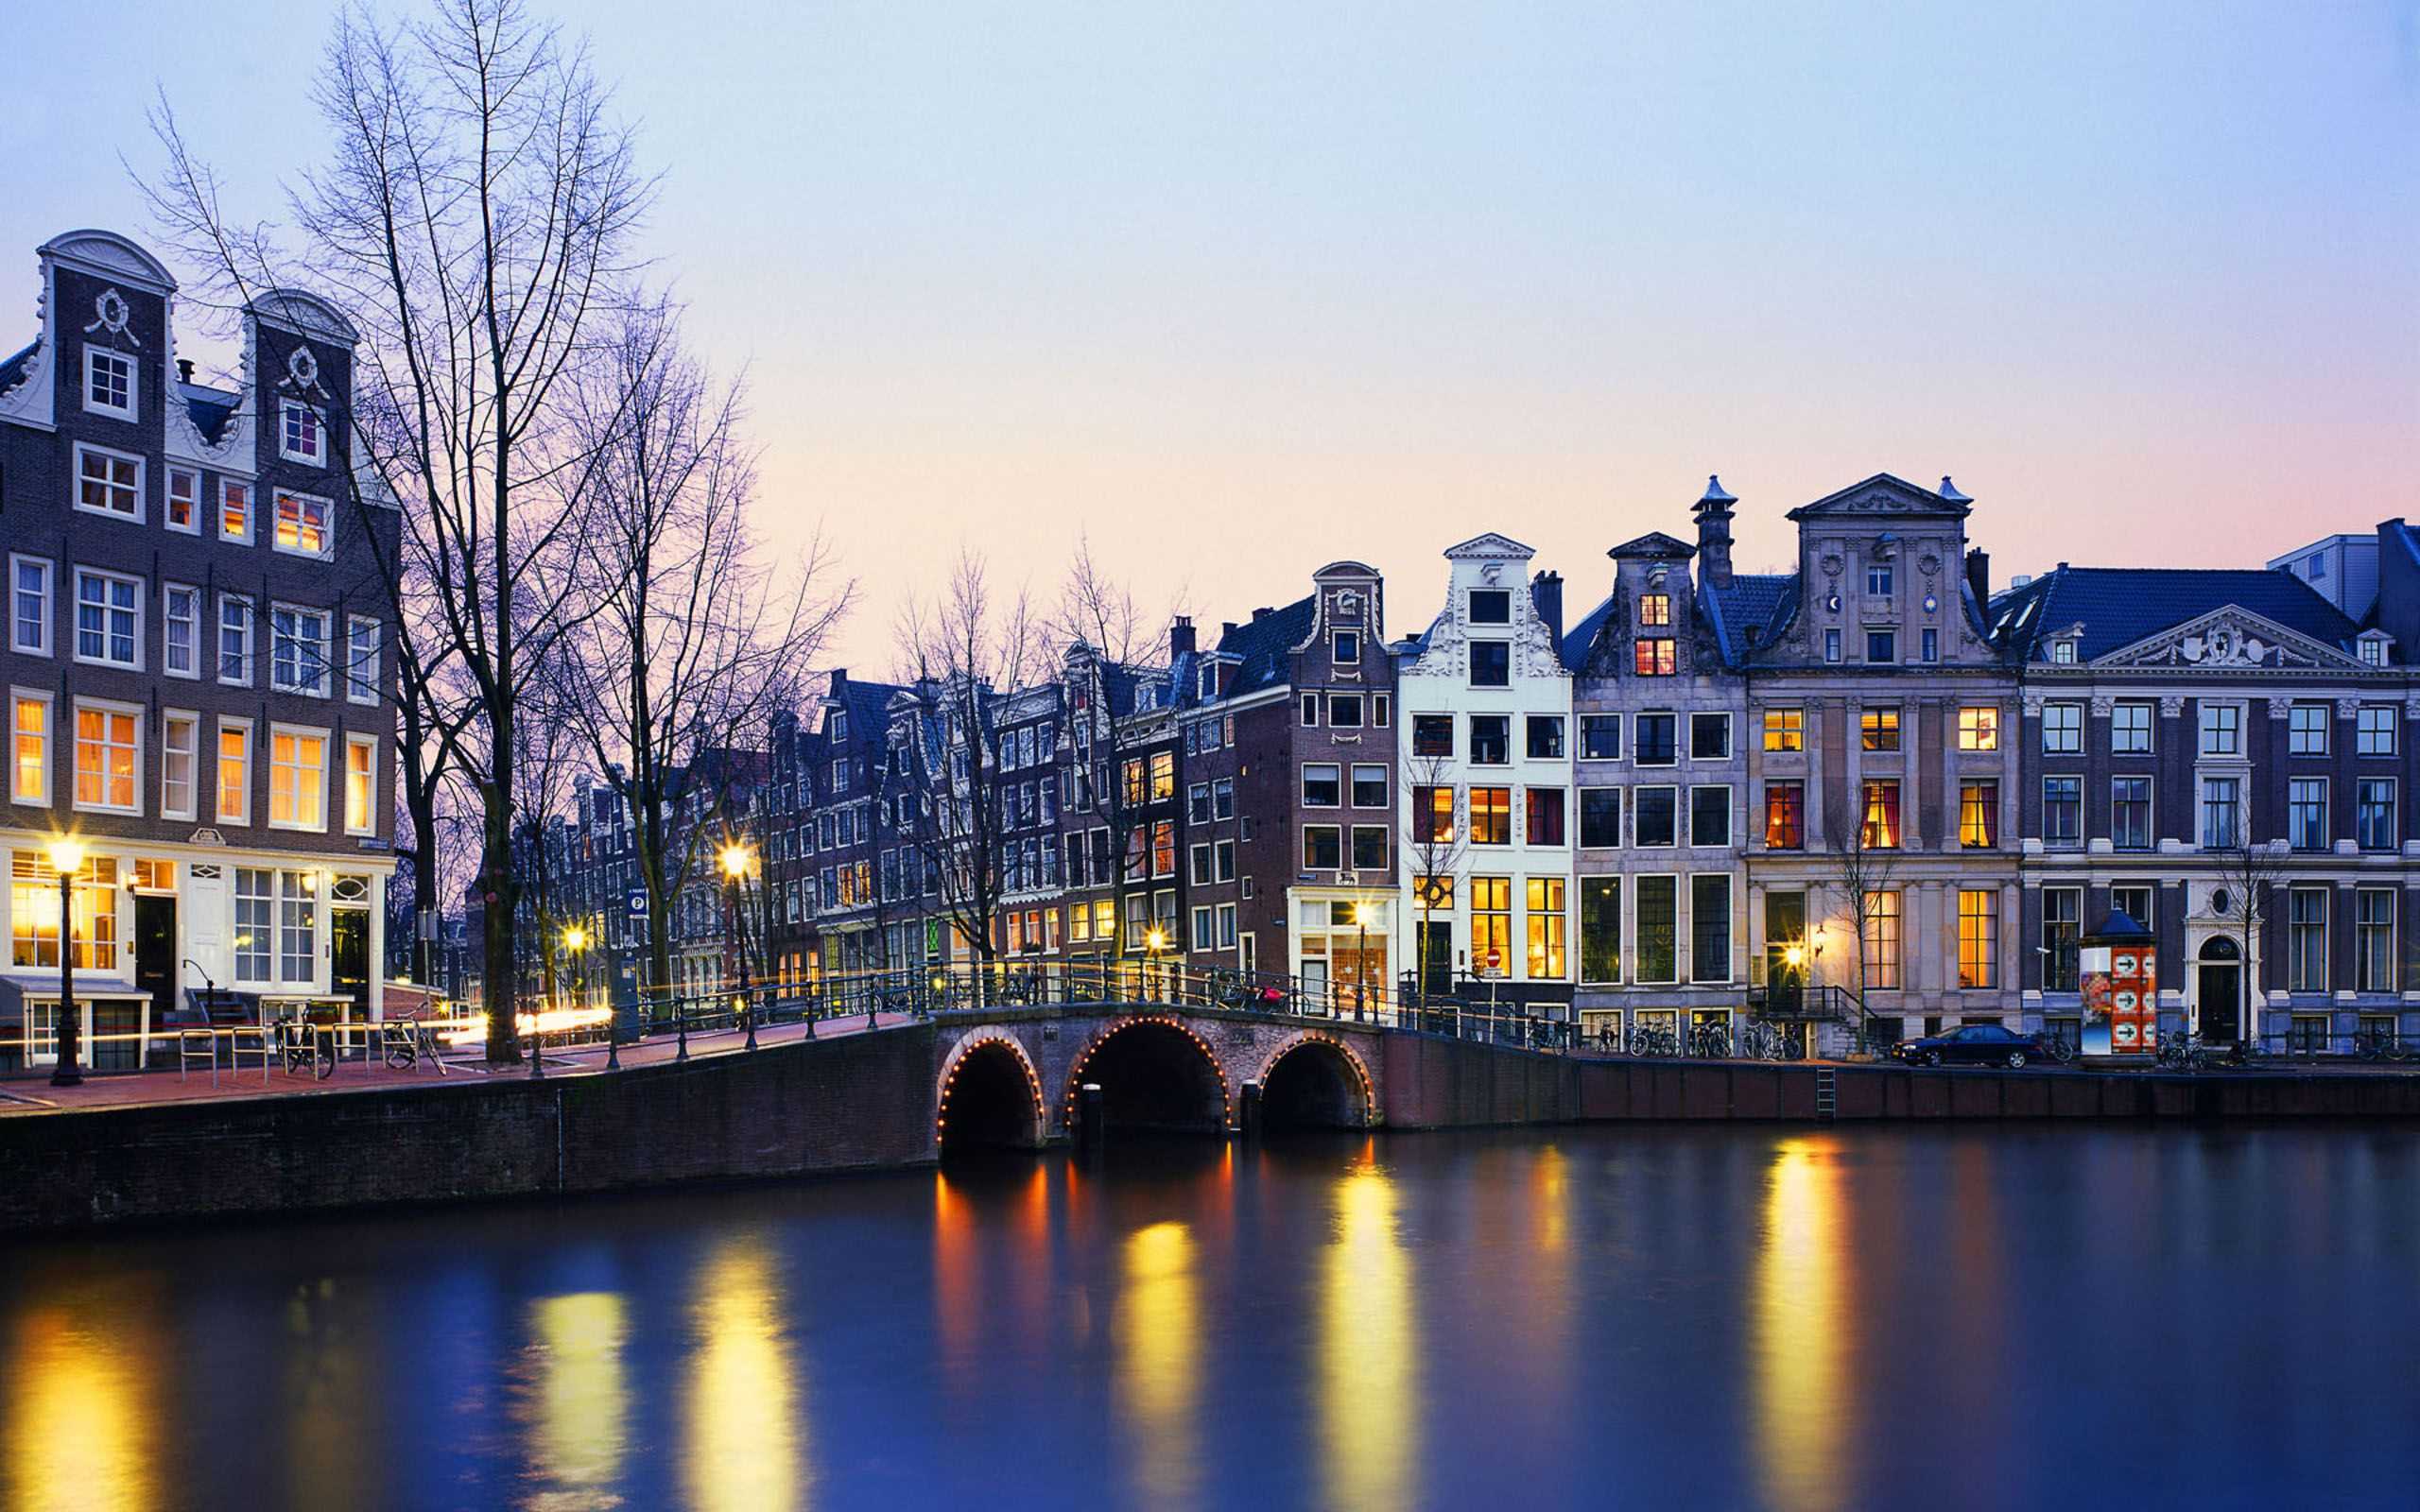 Shop around and party to the fullest for 4 nights at Amsterdam